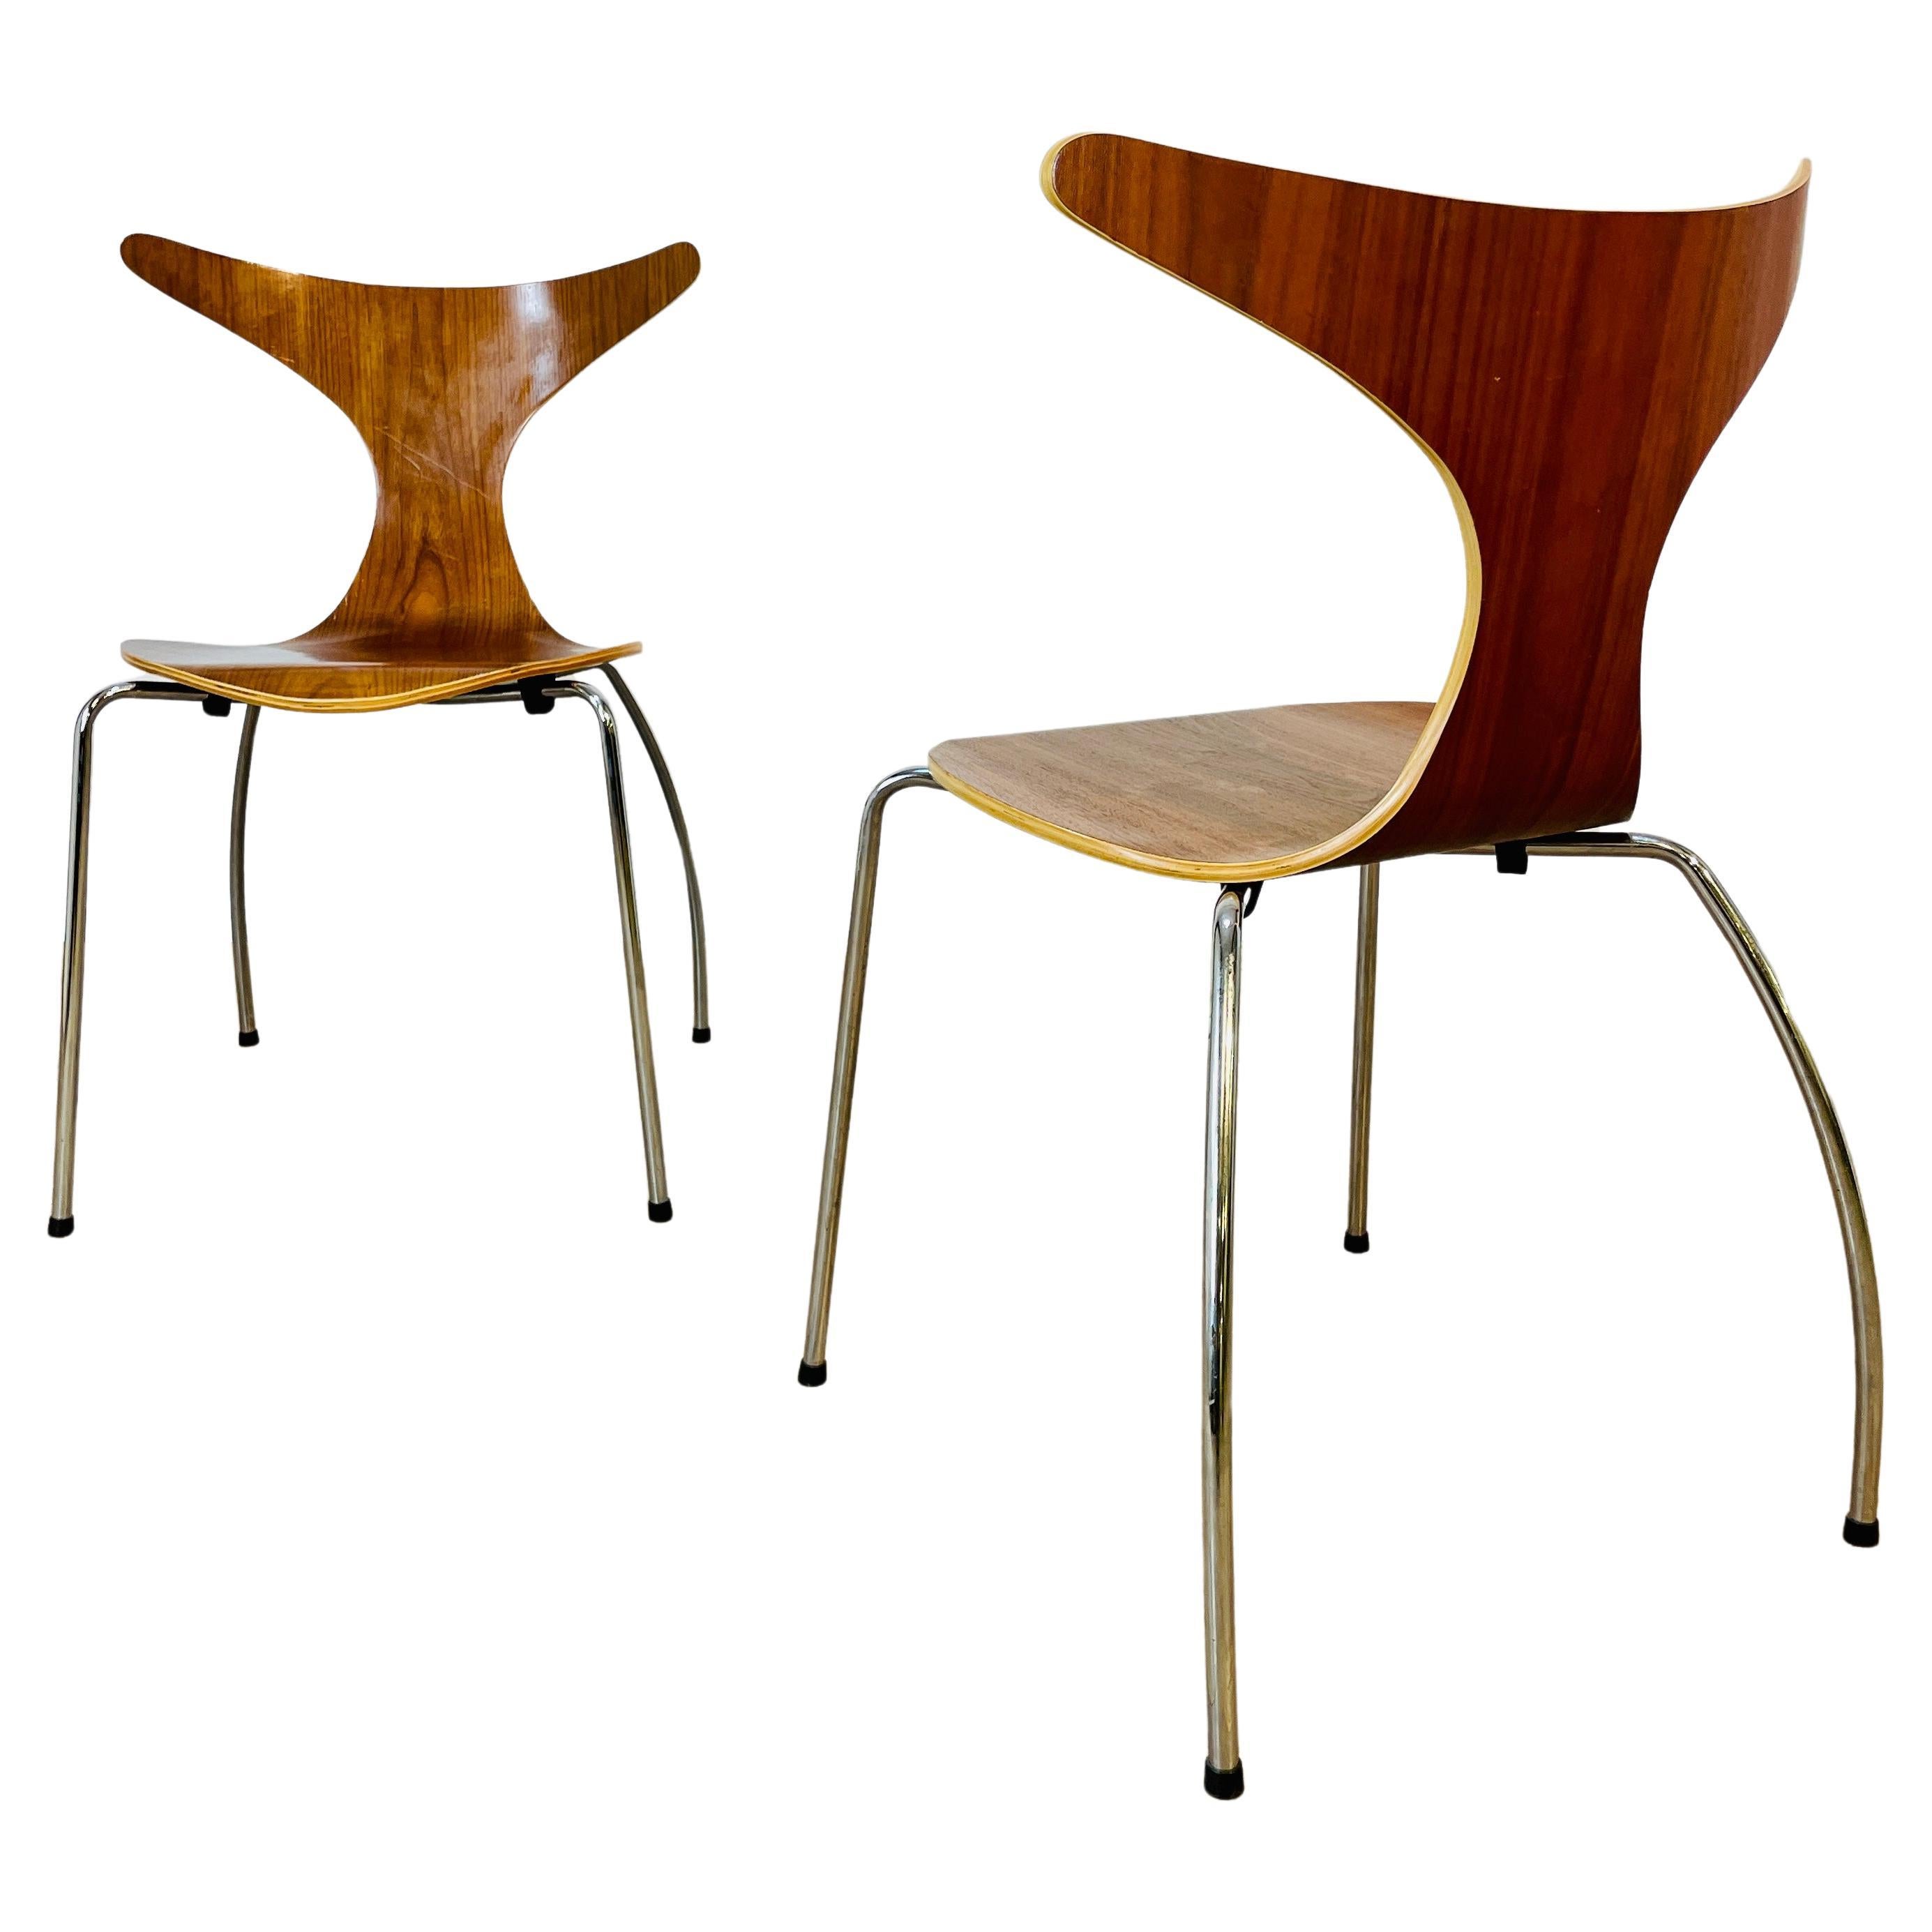 Vintage Pair of 'Dolphin' Stacking Chairs by Bjarke Nielsen for Dan-Form Denmark For Sale